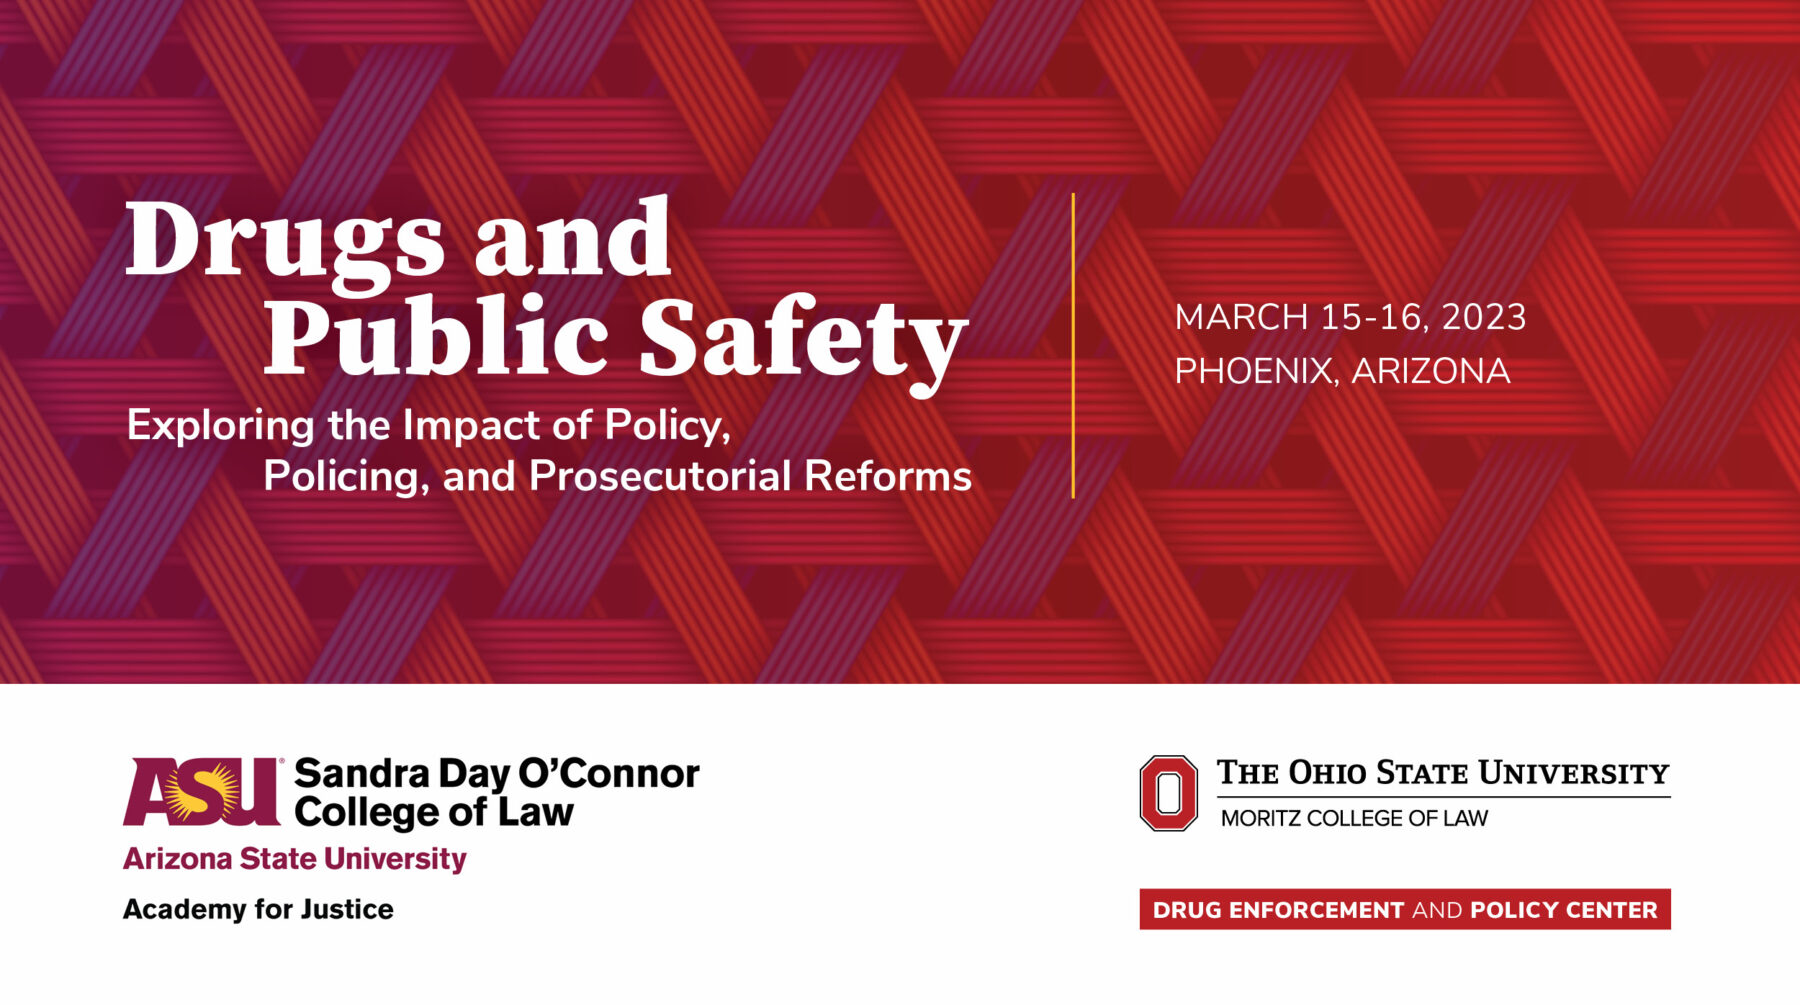 Drugs and Public Safety: Exploring the impact of policy, policing, and prosecutorial reforms. The event will be held on March 15 to 16, 2023 in Phoenix, Arizona. 